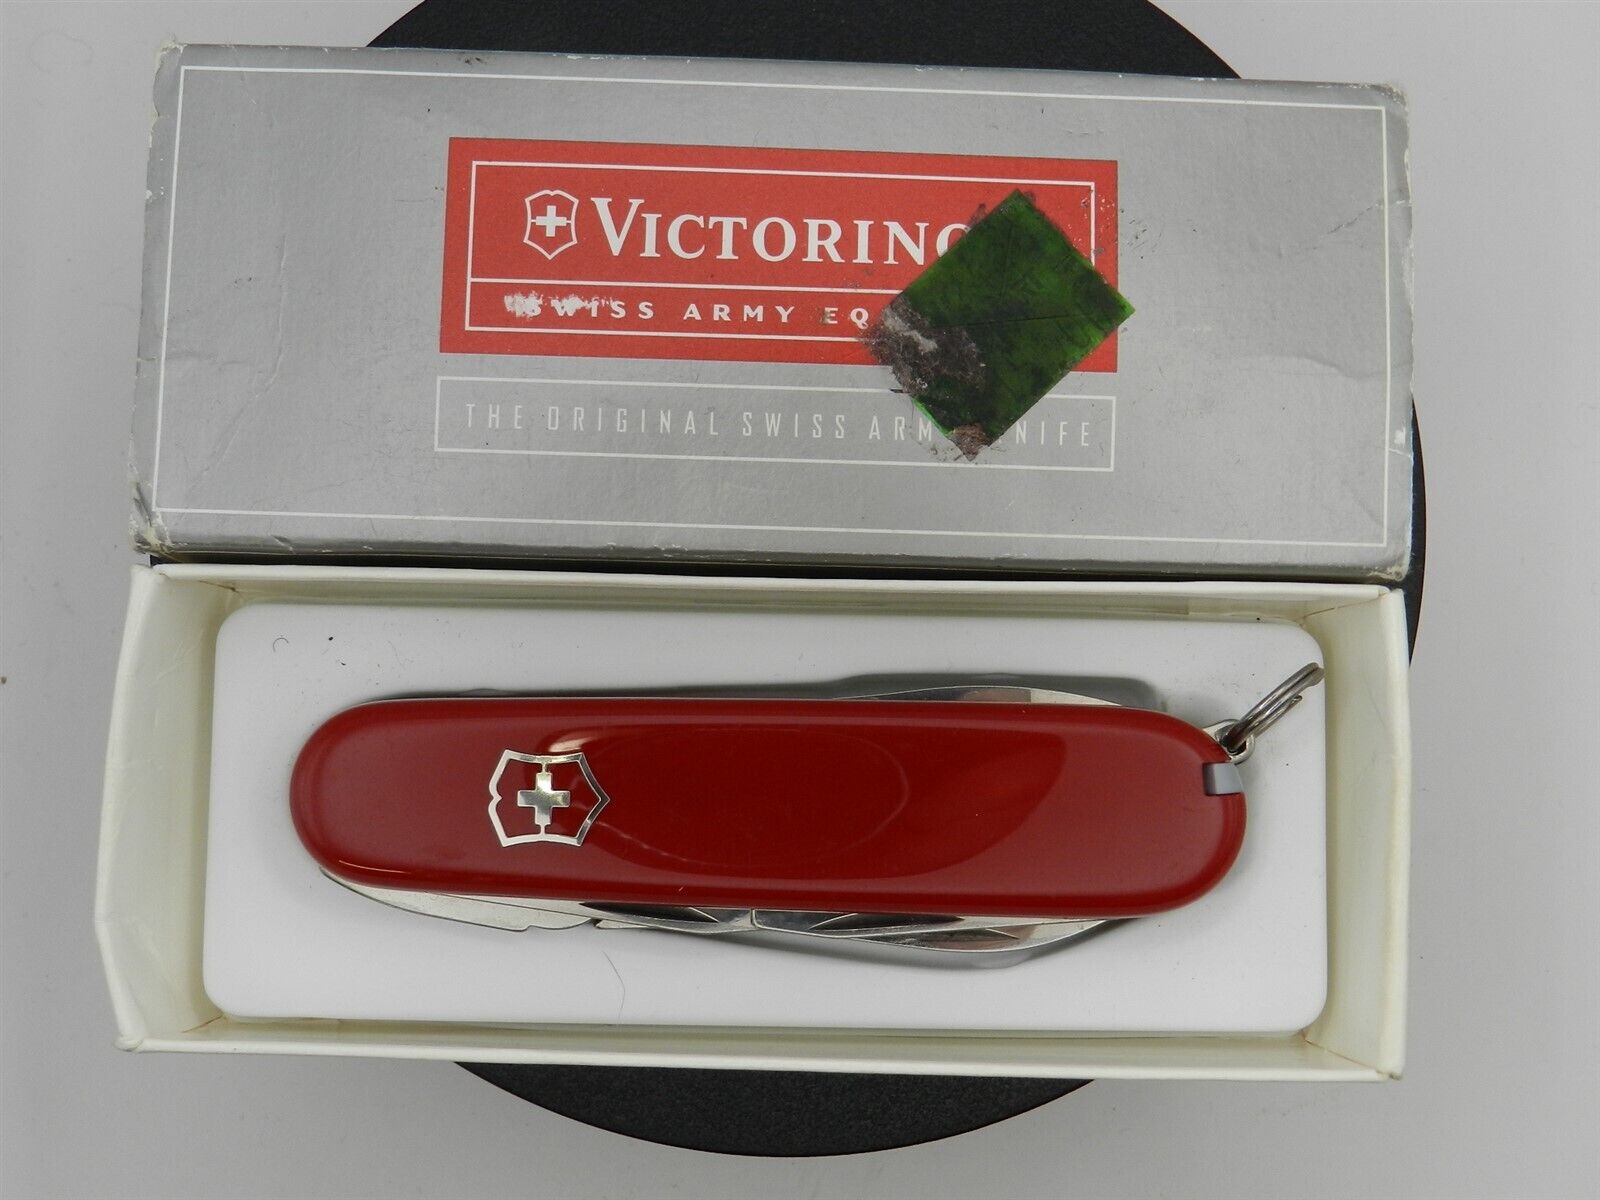 VICTORINOX Mechanic 91mm Red Swiss Army Knife Model 53441 Discontinued in Box